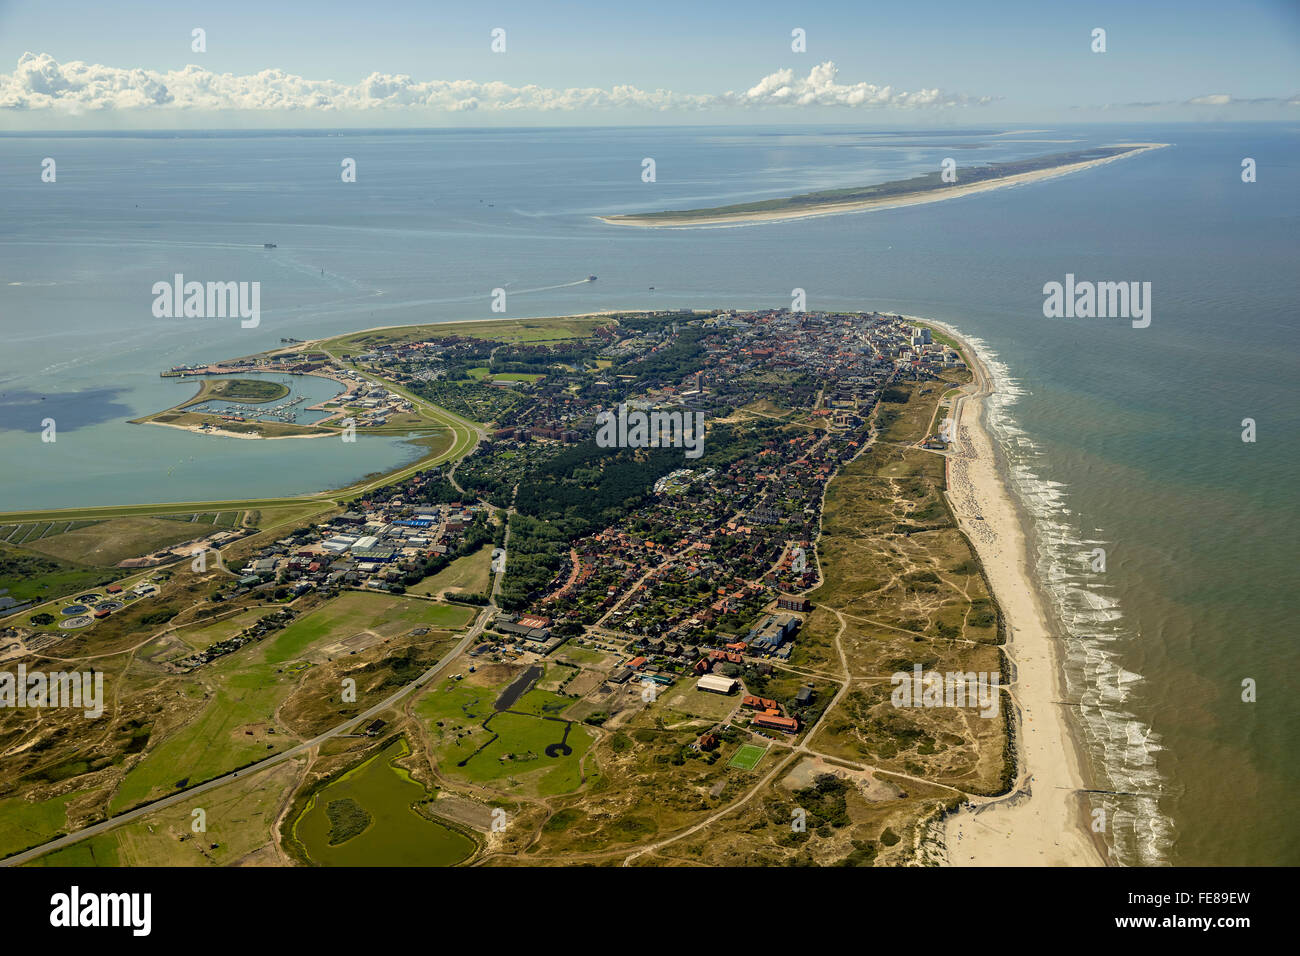 Place Norderney, West Island, Wadden Sea, aerial view, Norderney, North Sea, North Sea island, East Frisian Islands,Lower Saxony Stock Photo